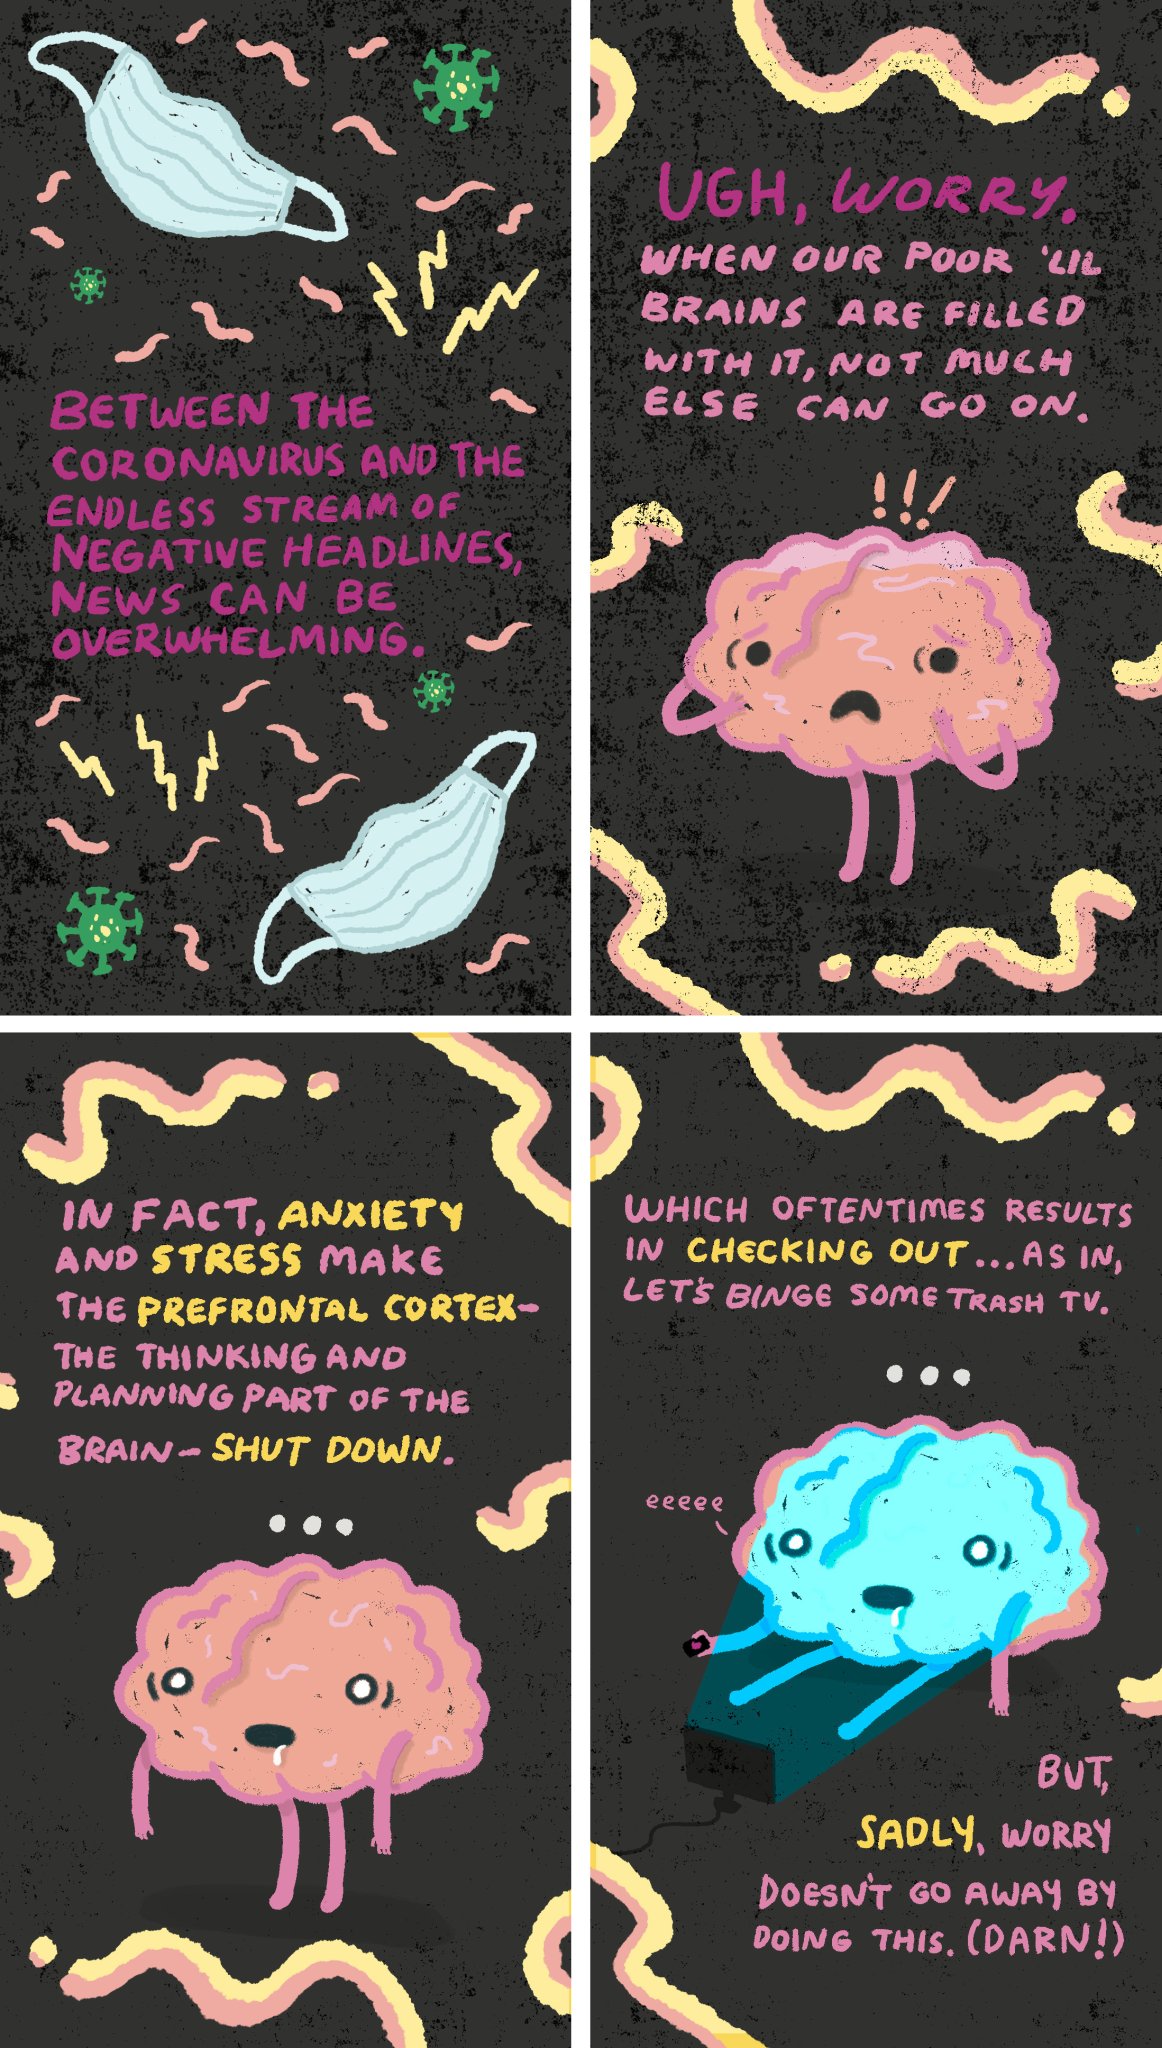 COMIC: When the bad news is endless, here's how to cope with your anxiety